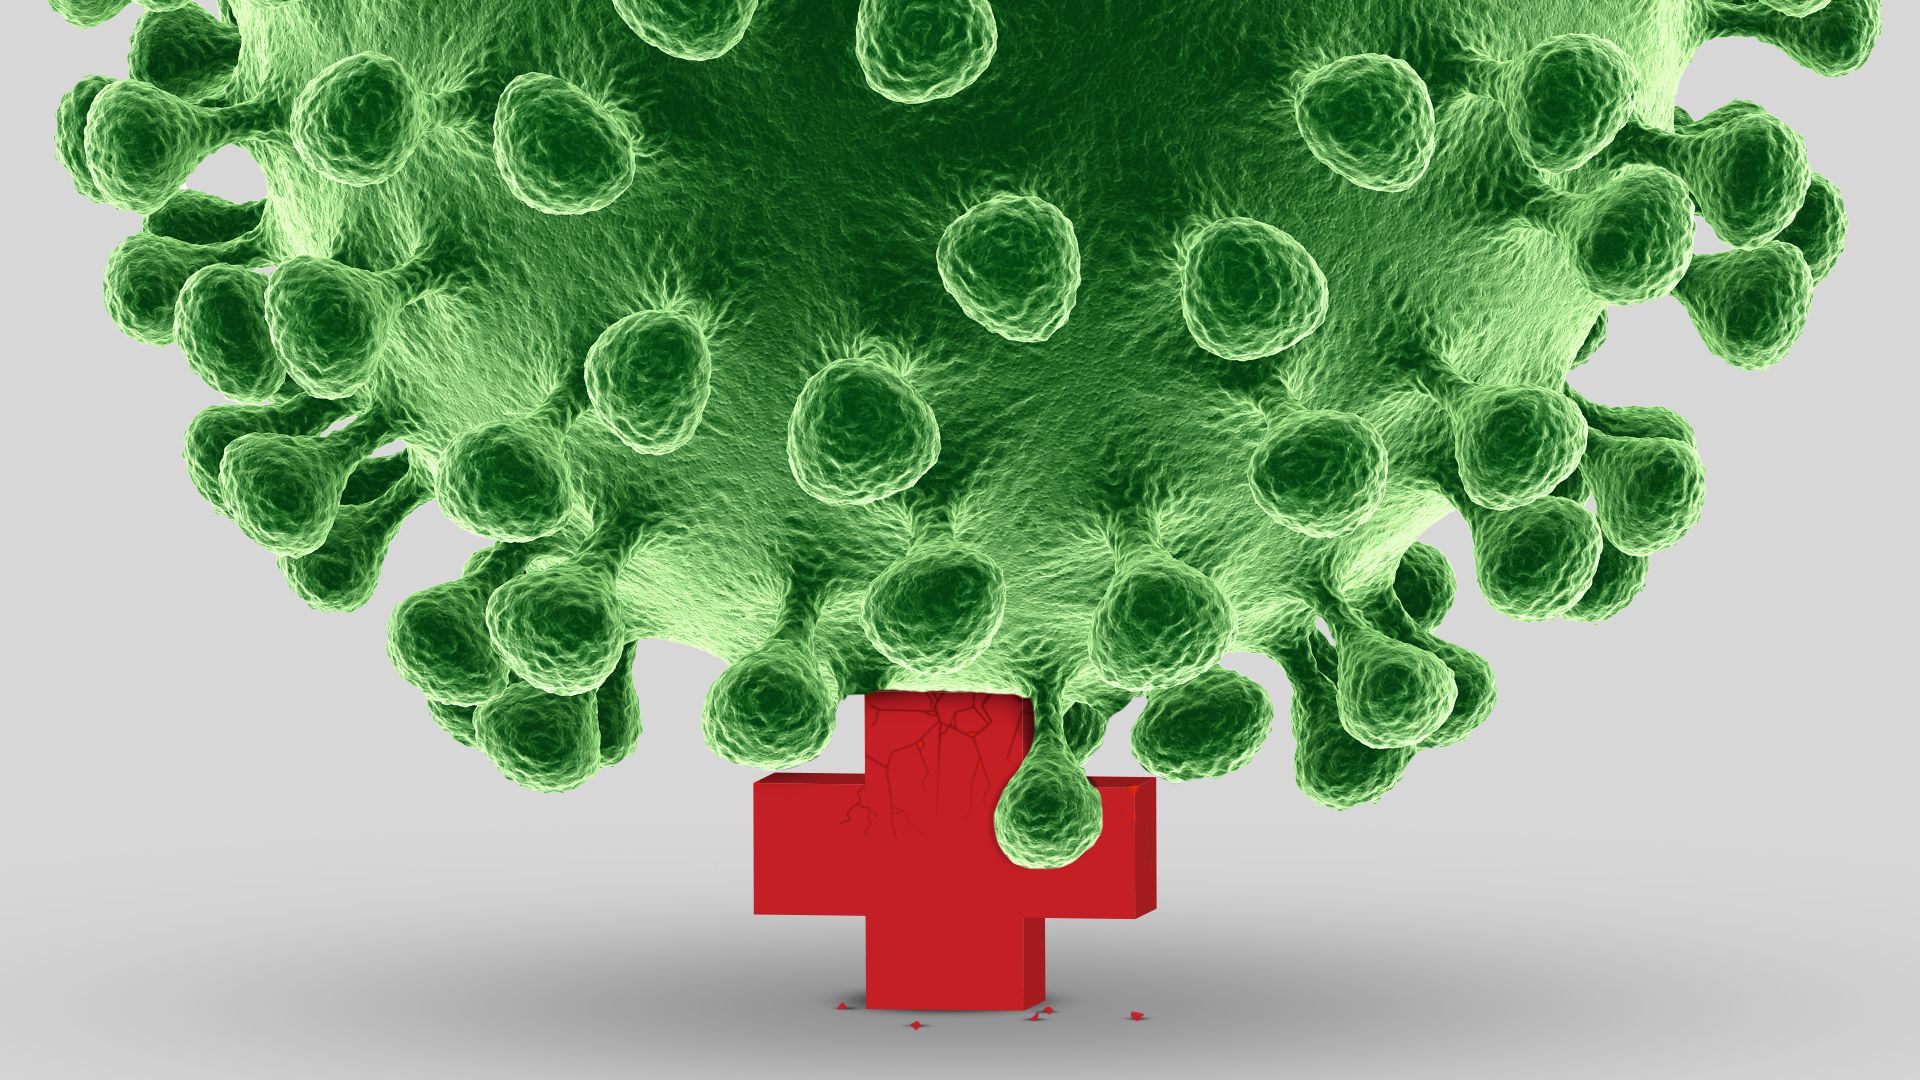 Illustration of a giant virus cell crushing a crumbling red cross.